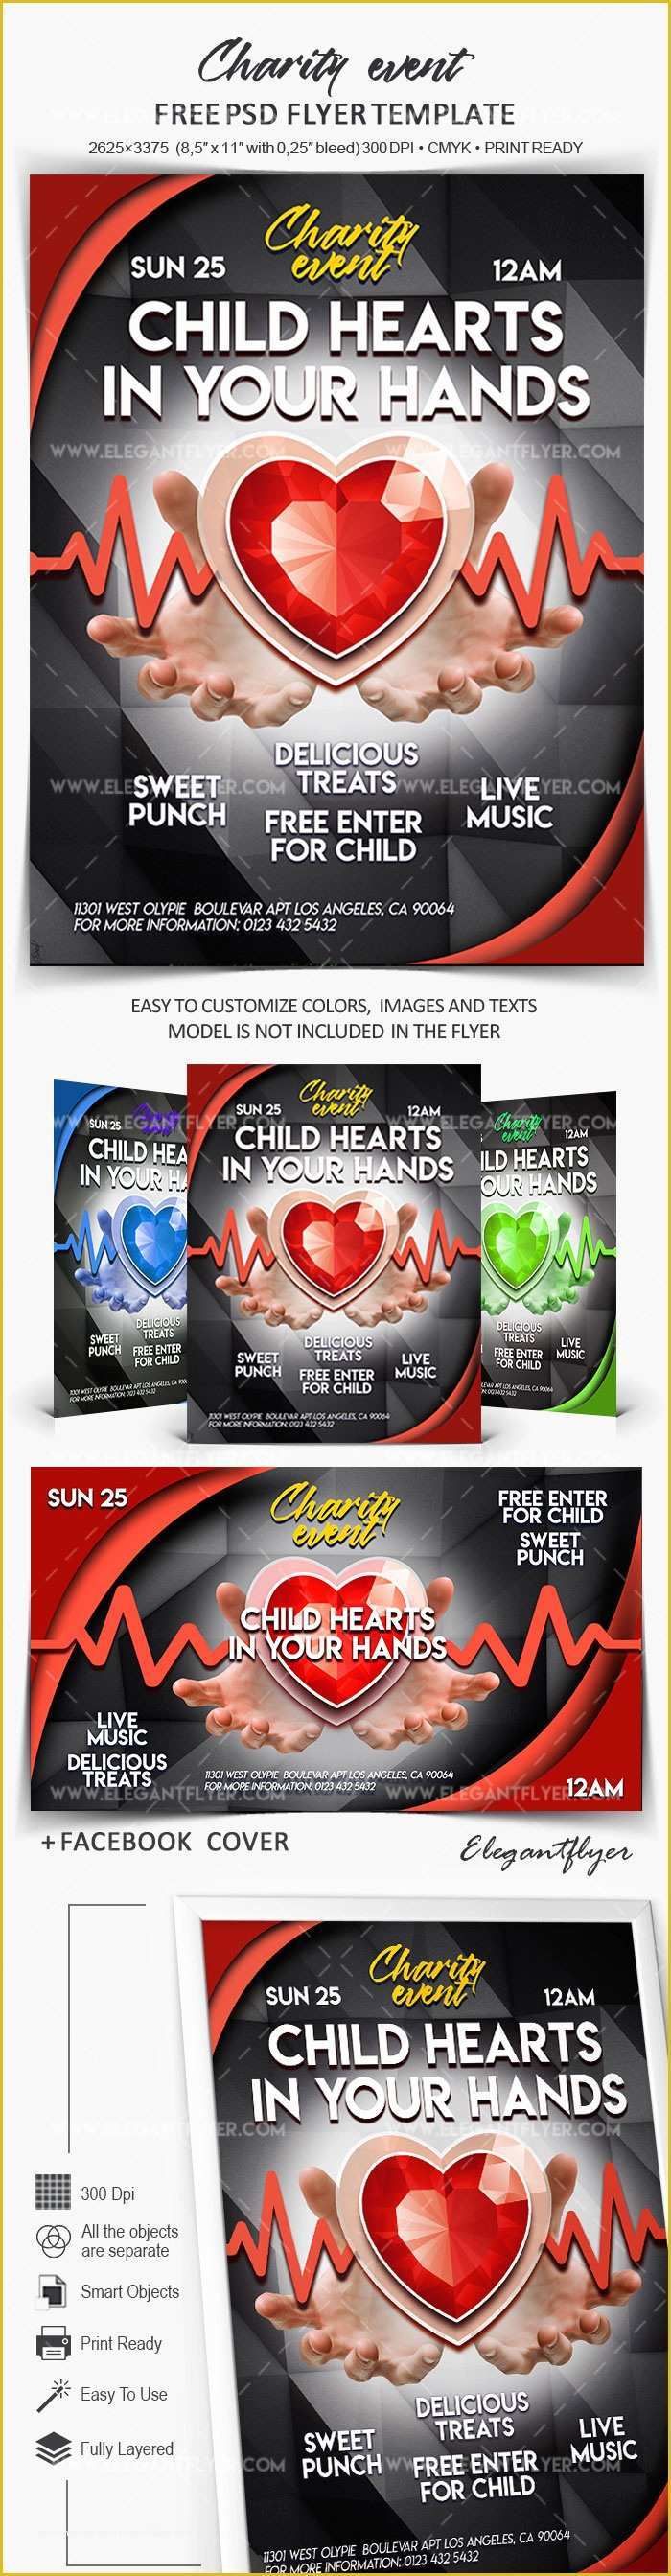 Charity event Flyer Templates Free Of Charity event – Free Flyer Psd Template – by Elegantflyer